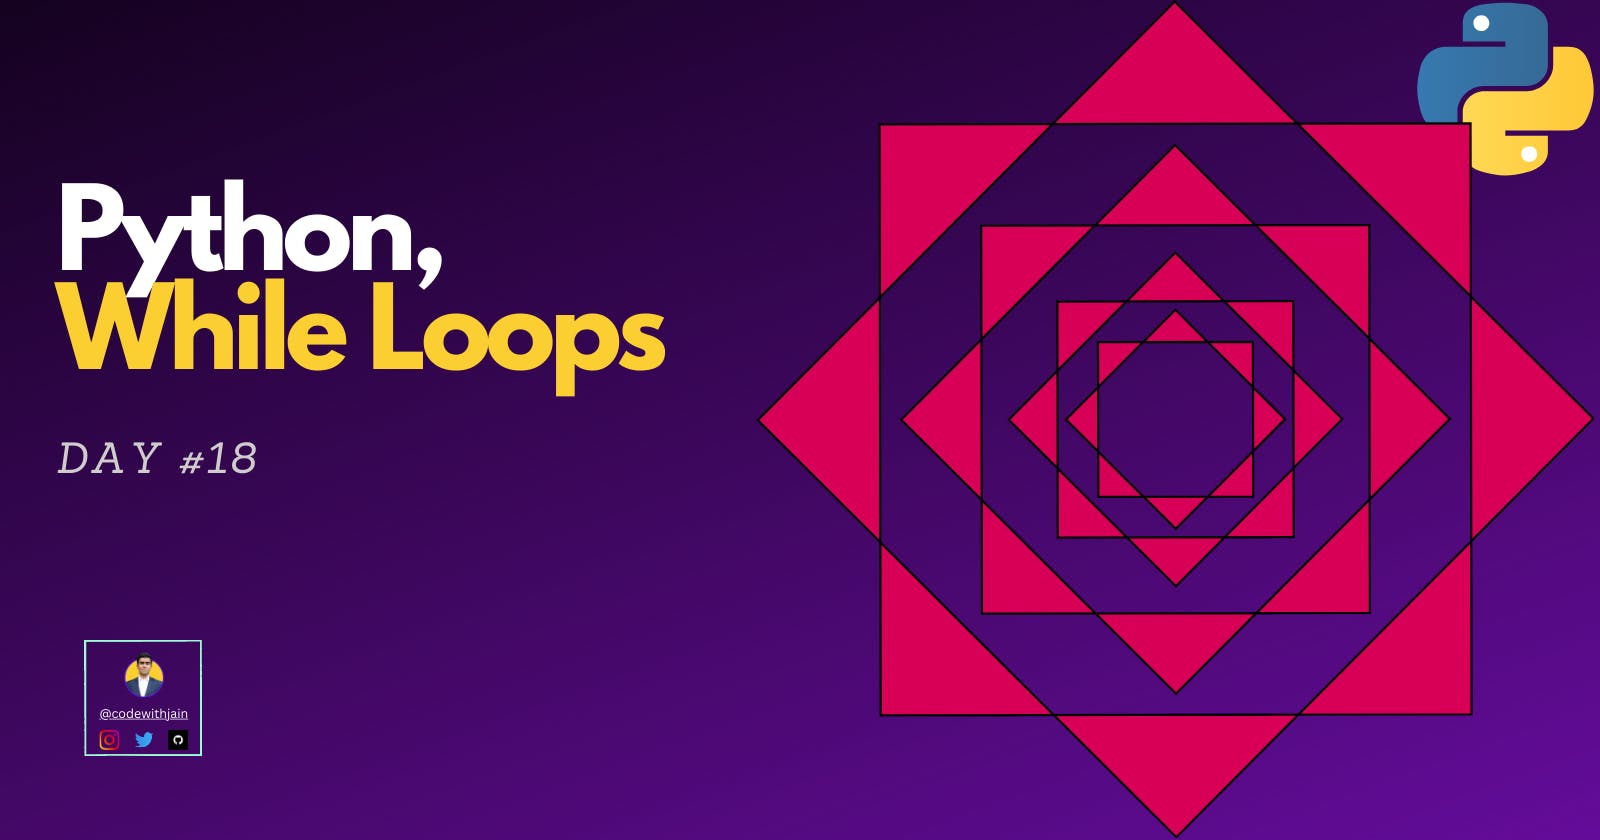 Day #18 - While loops